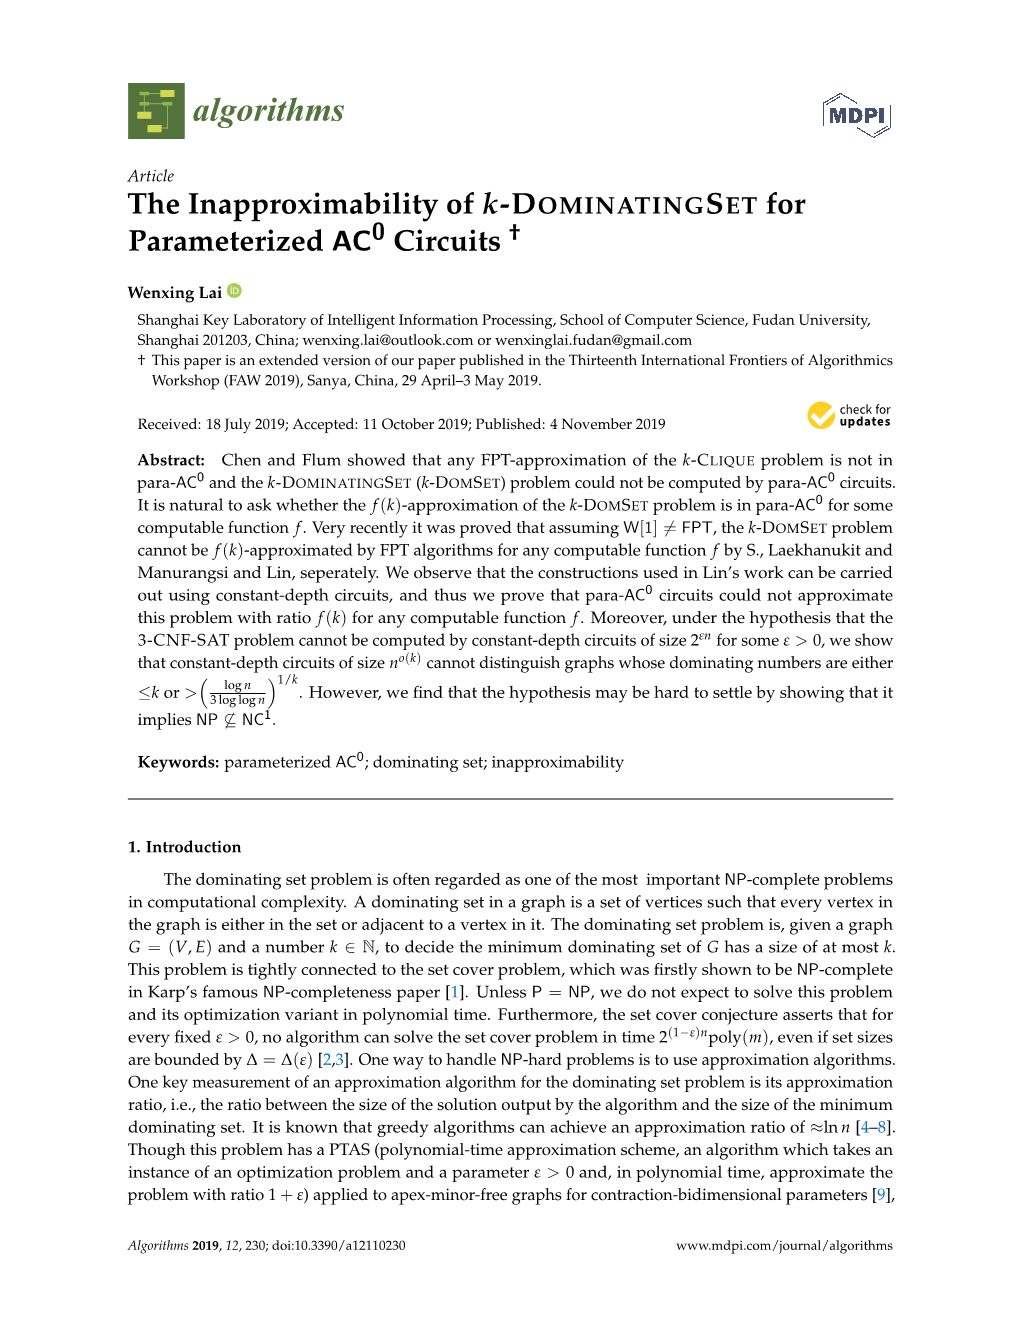 The Inapproximability of K-DOMINATINGSET for Parameterized AC0 Circuits †